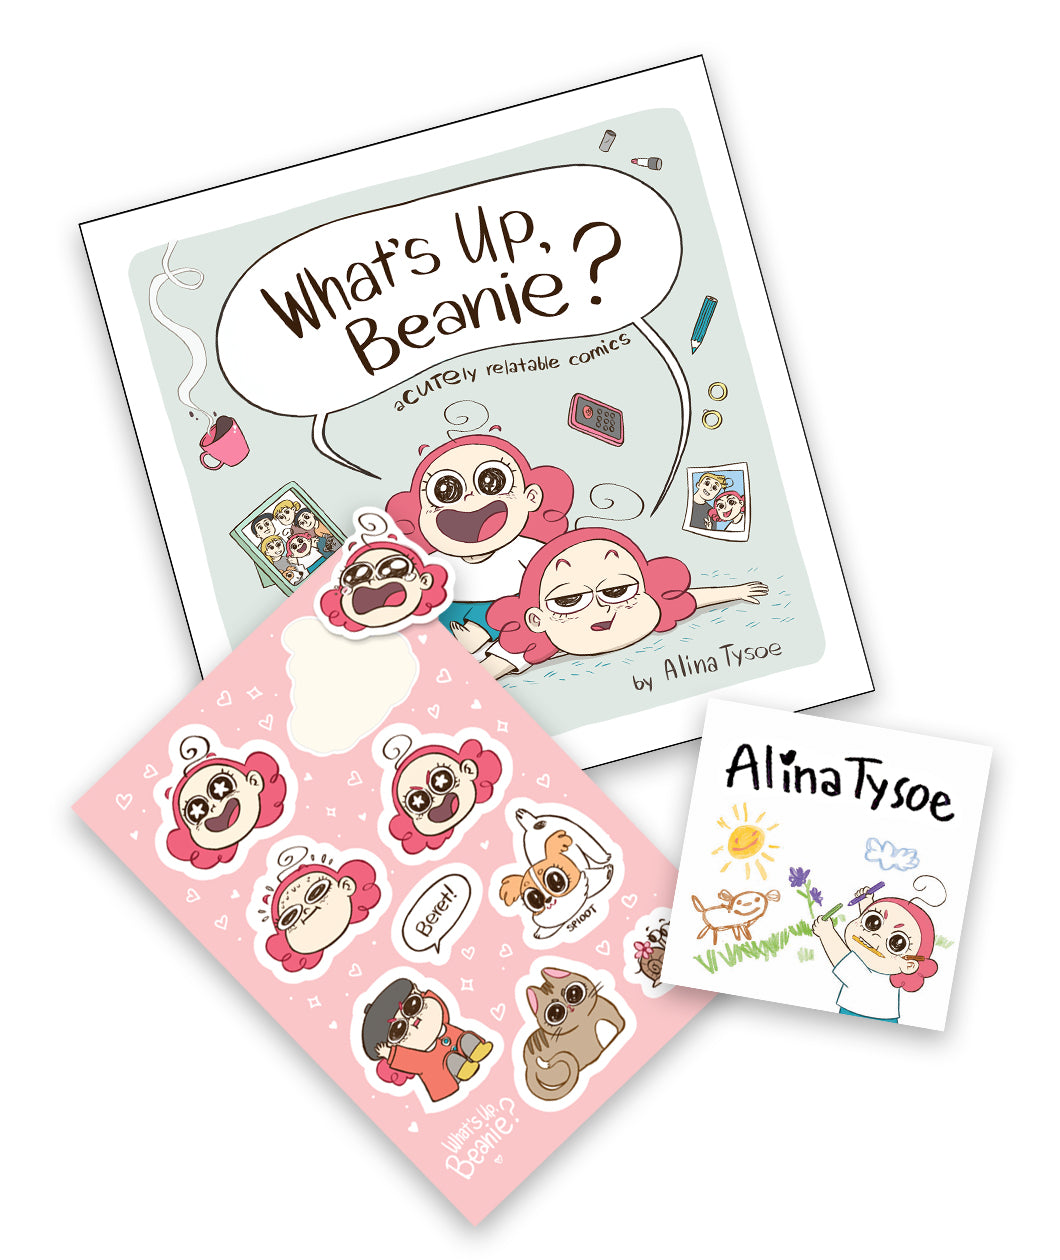 Three items in a pile: A rectangular pink sticker sheet that contains 9 stickers of cartoon drawings of beanie and pets. A signed square bookplate that has a drawing of Beanie sketching a scene and the signature 